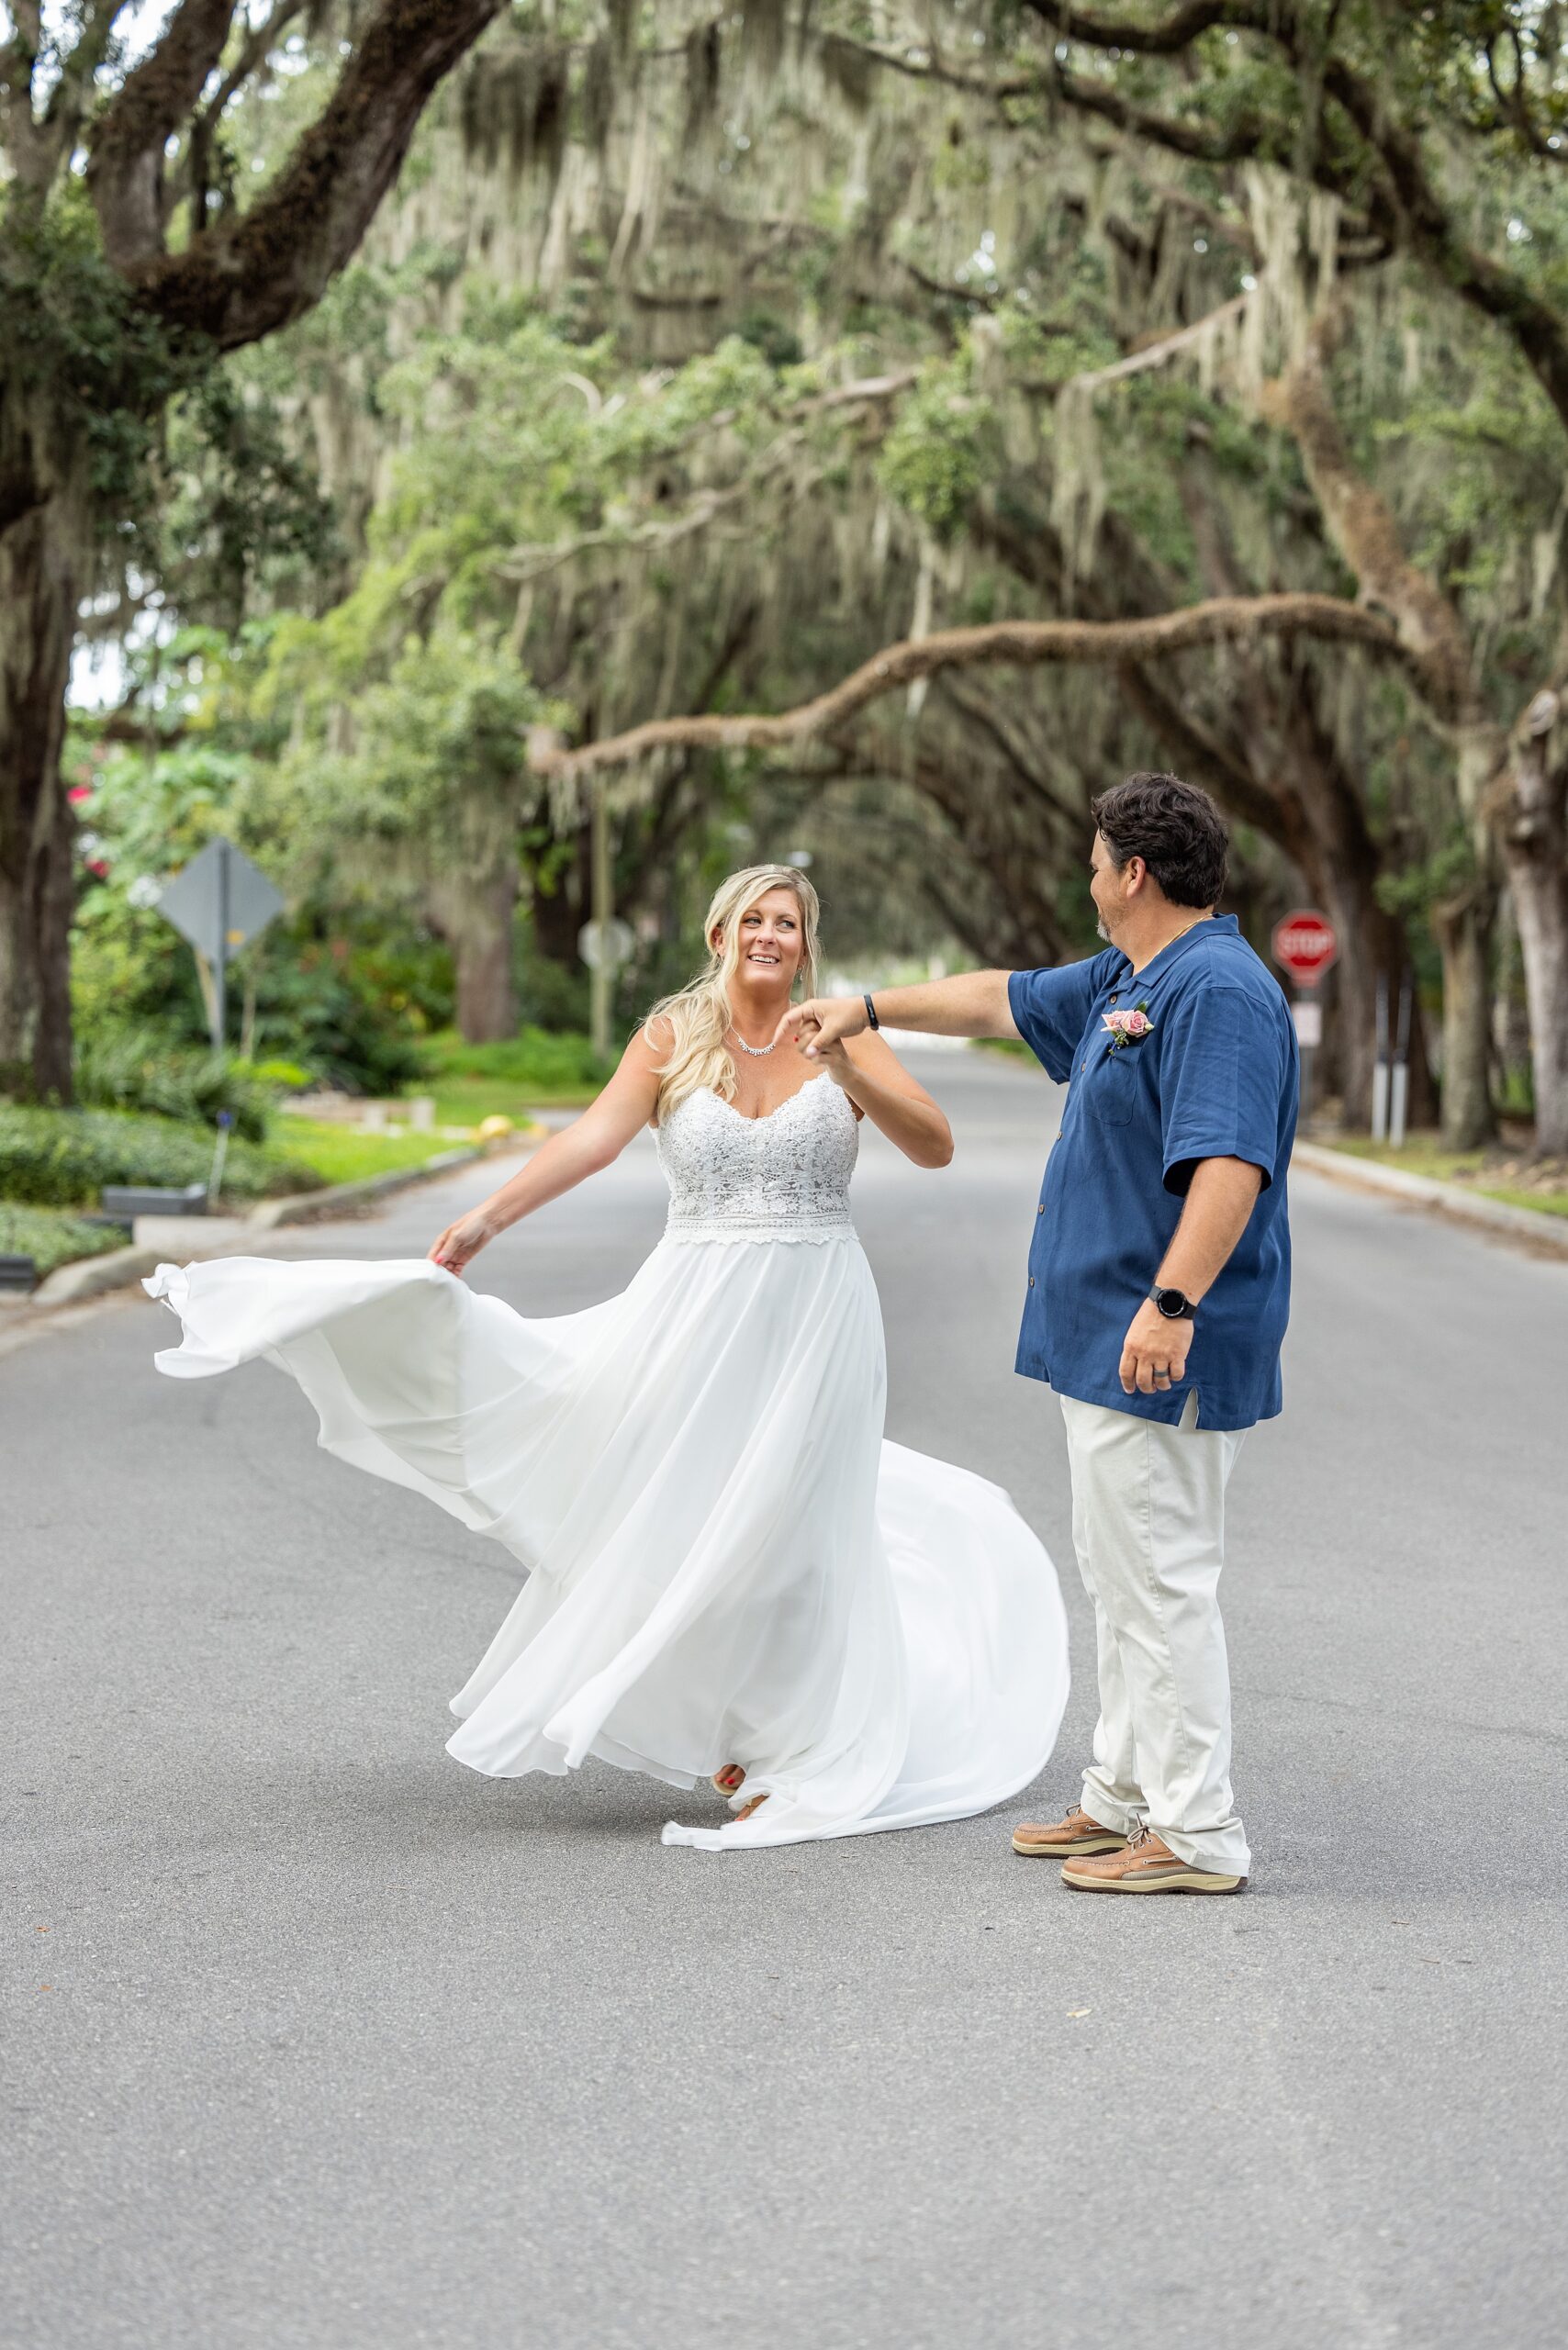 Newlyweds dance and twirl in the street lined with tall oak trees at their fountain of youth wedding